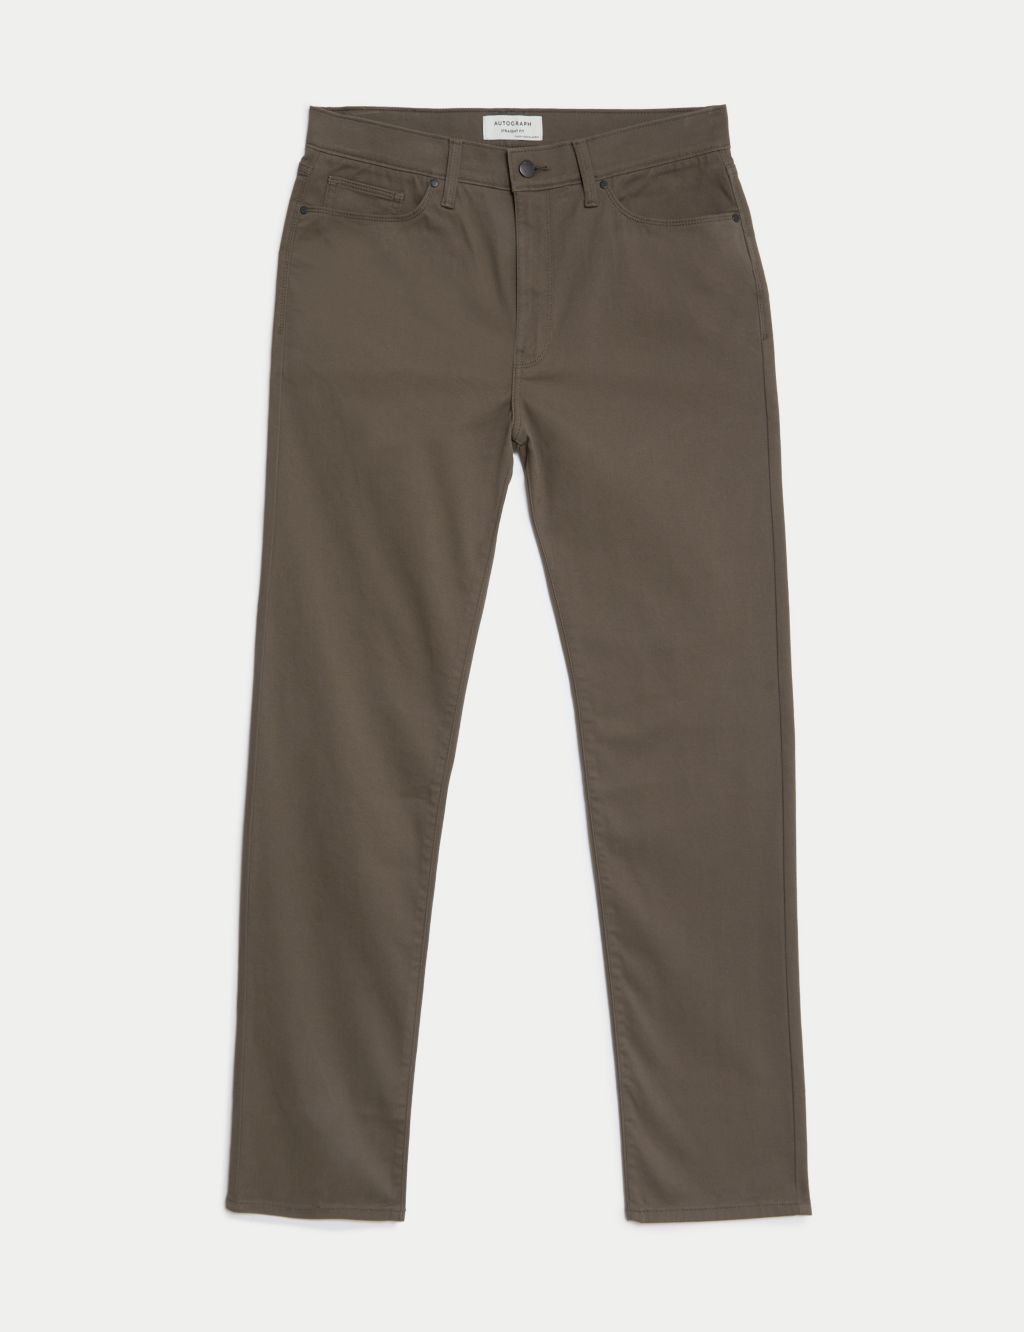 Straight Fit Italian 5 Pocket Trousers image 2